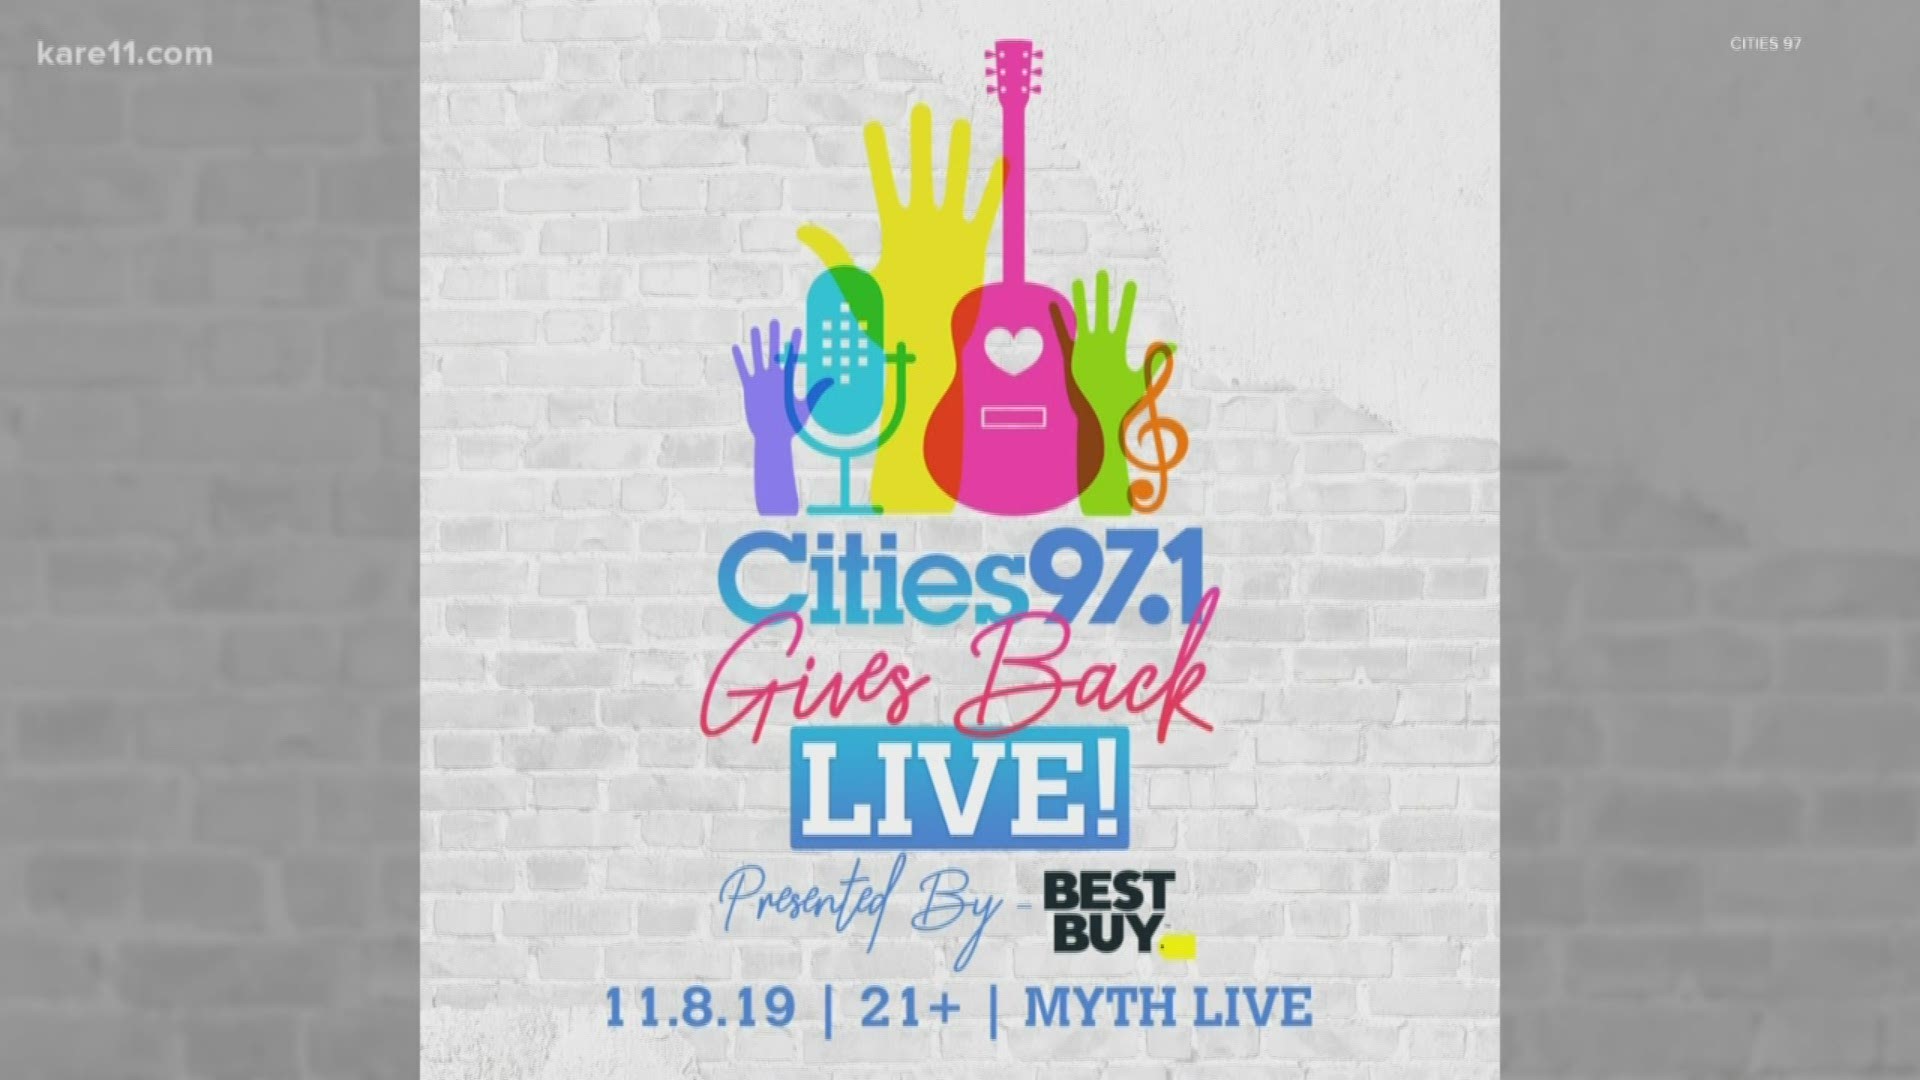 For 30 years it was the Cities 97.1 Sampler which has raised more than 13 million dollars to help local charities.